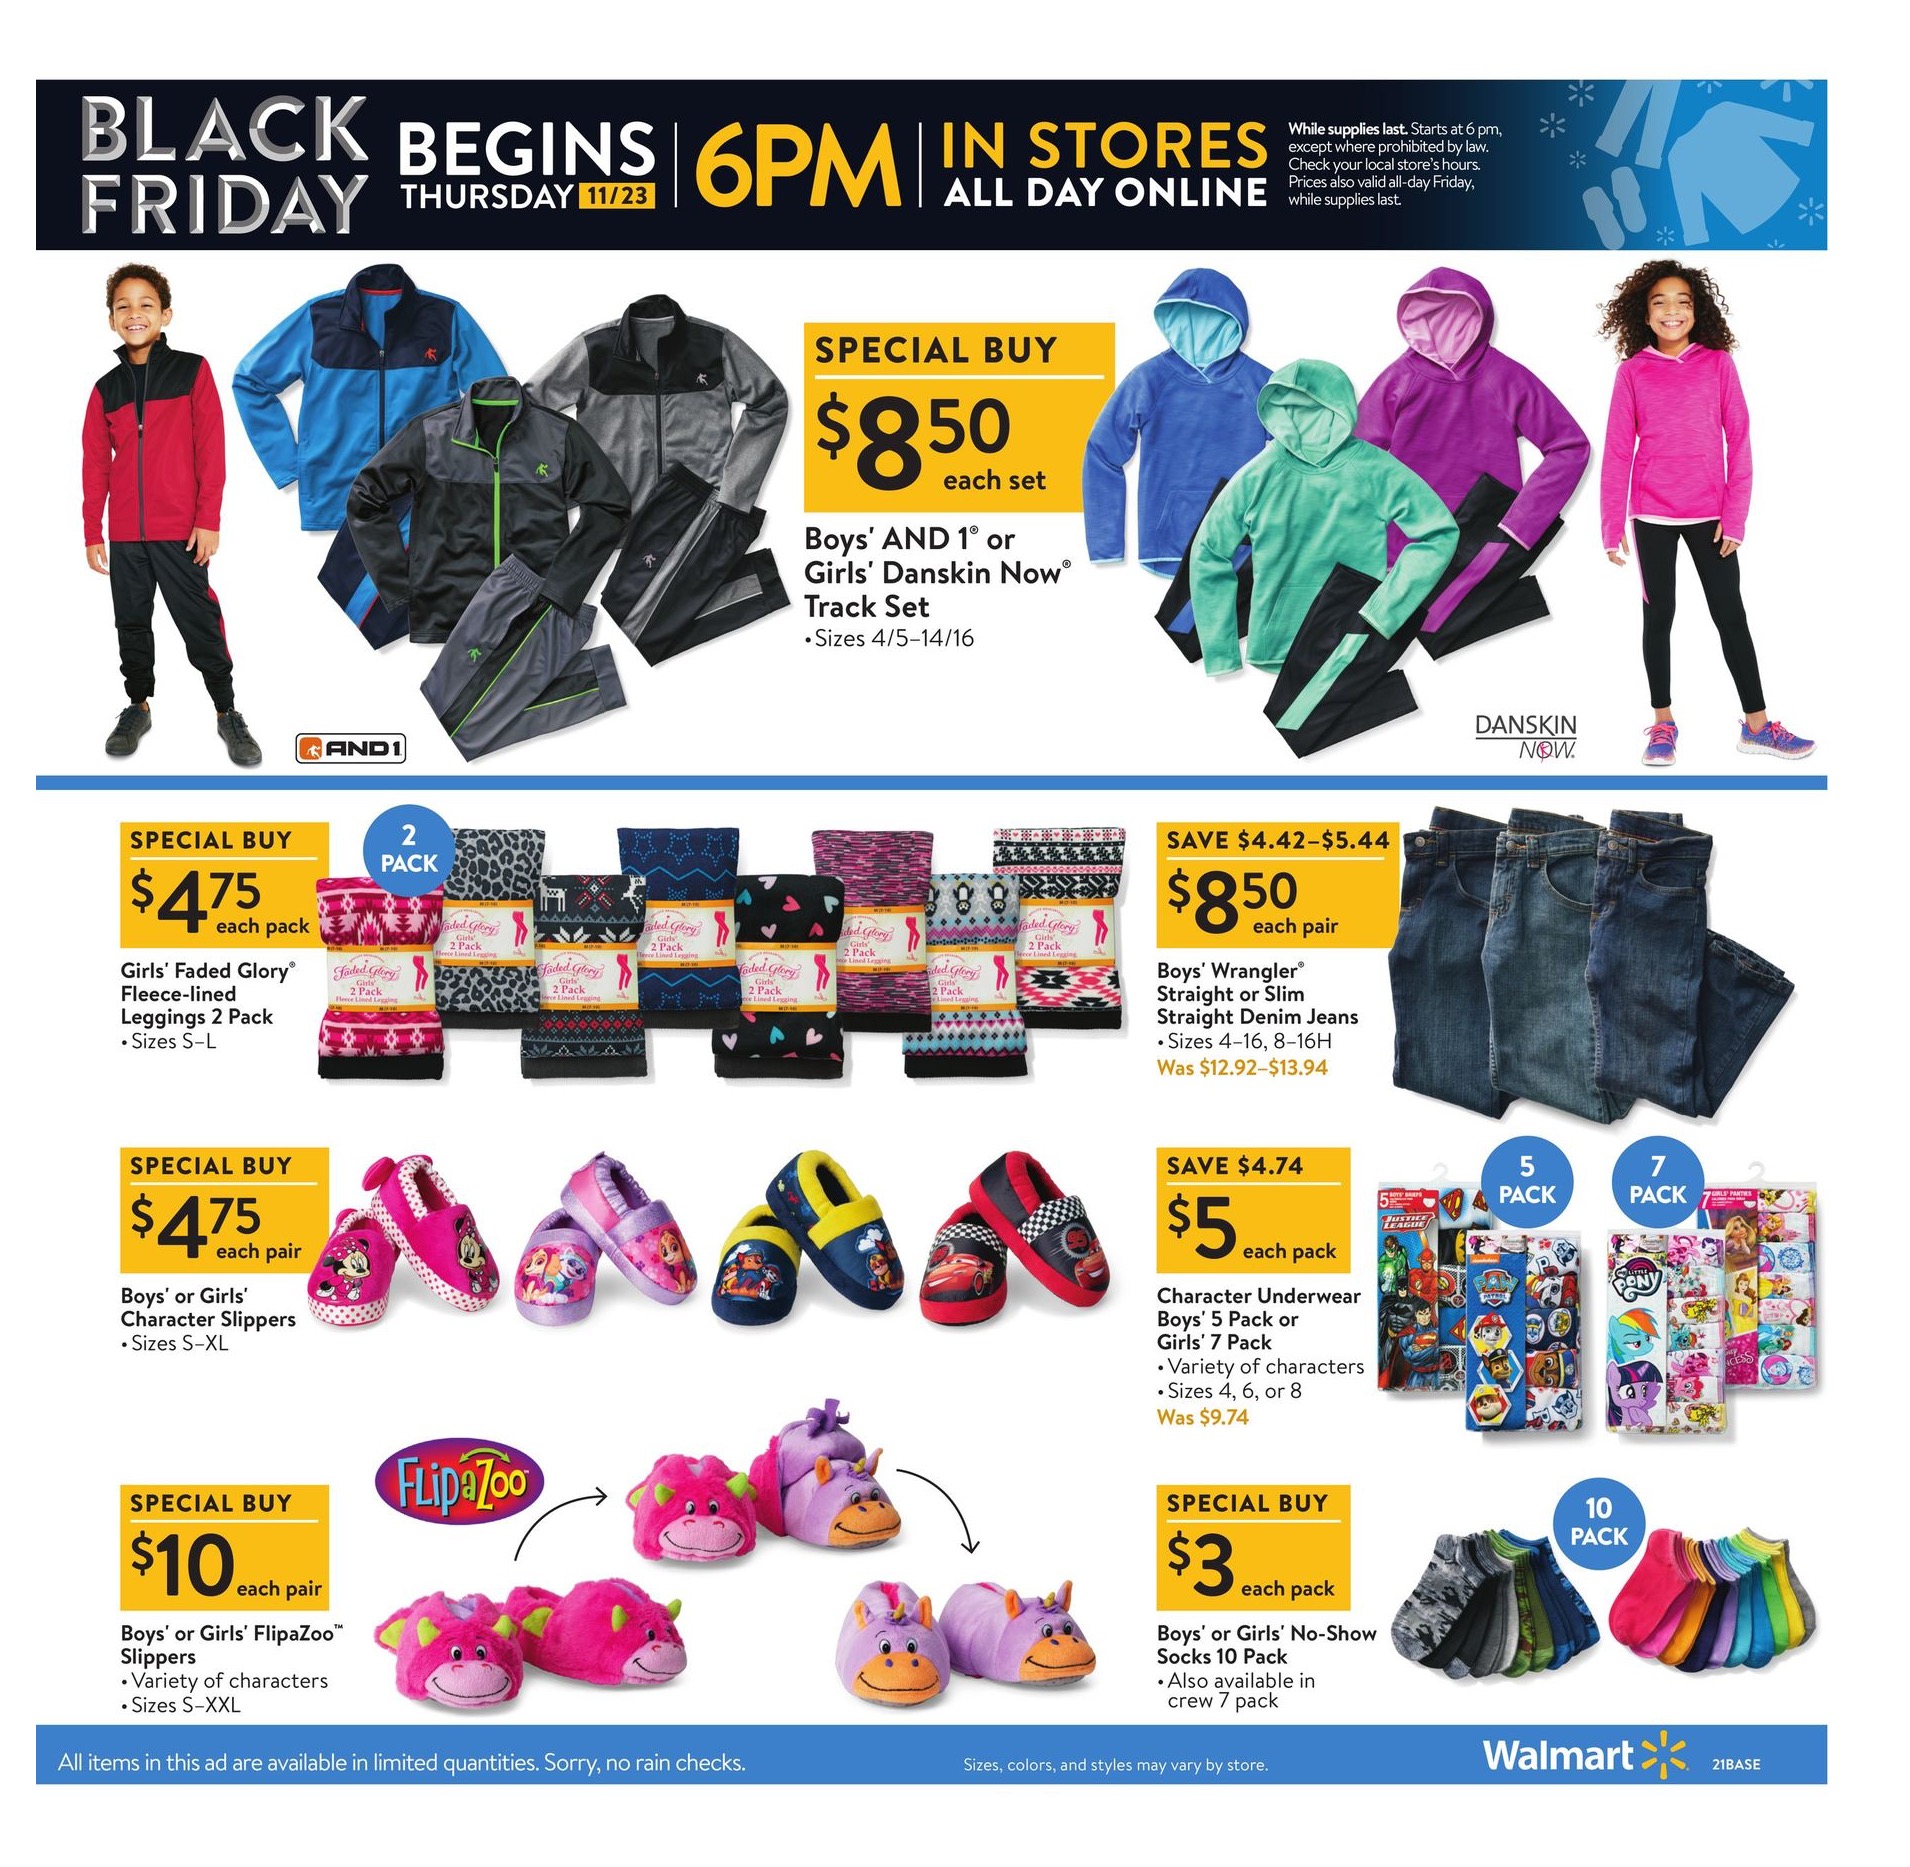 Here’s the full 36-page Black Friday 2017 ad from Walmart – BGR